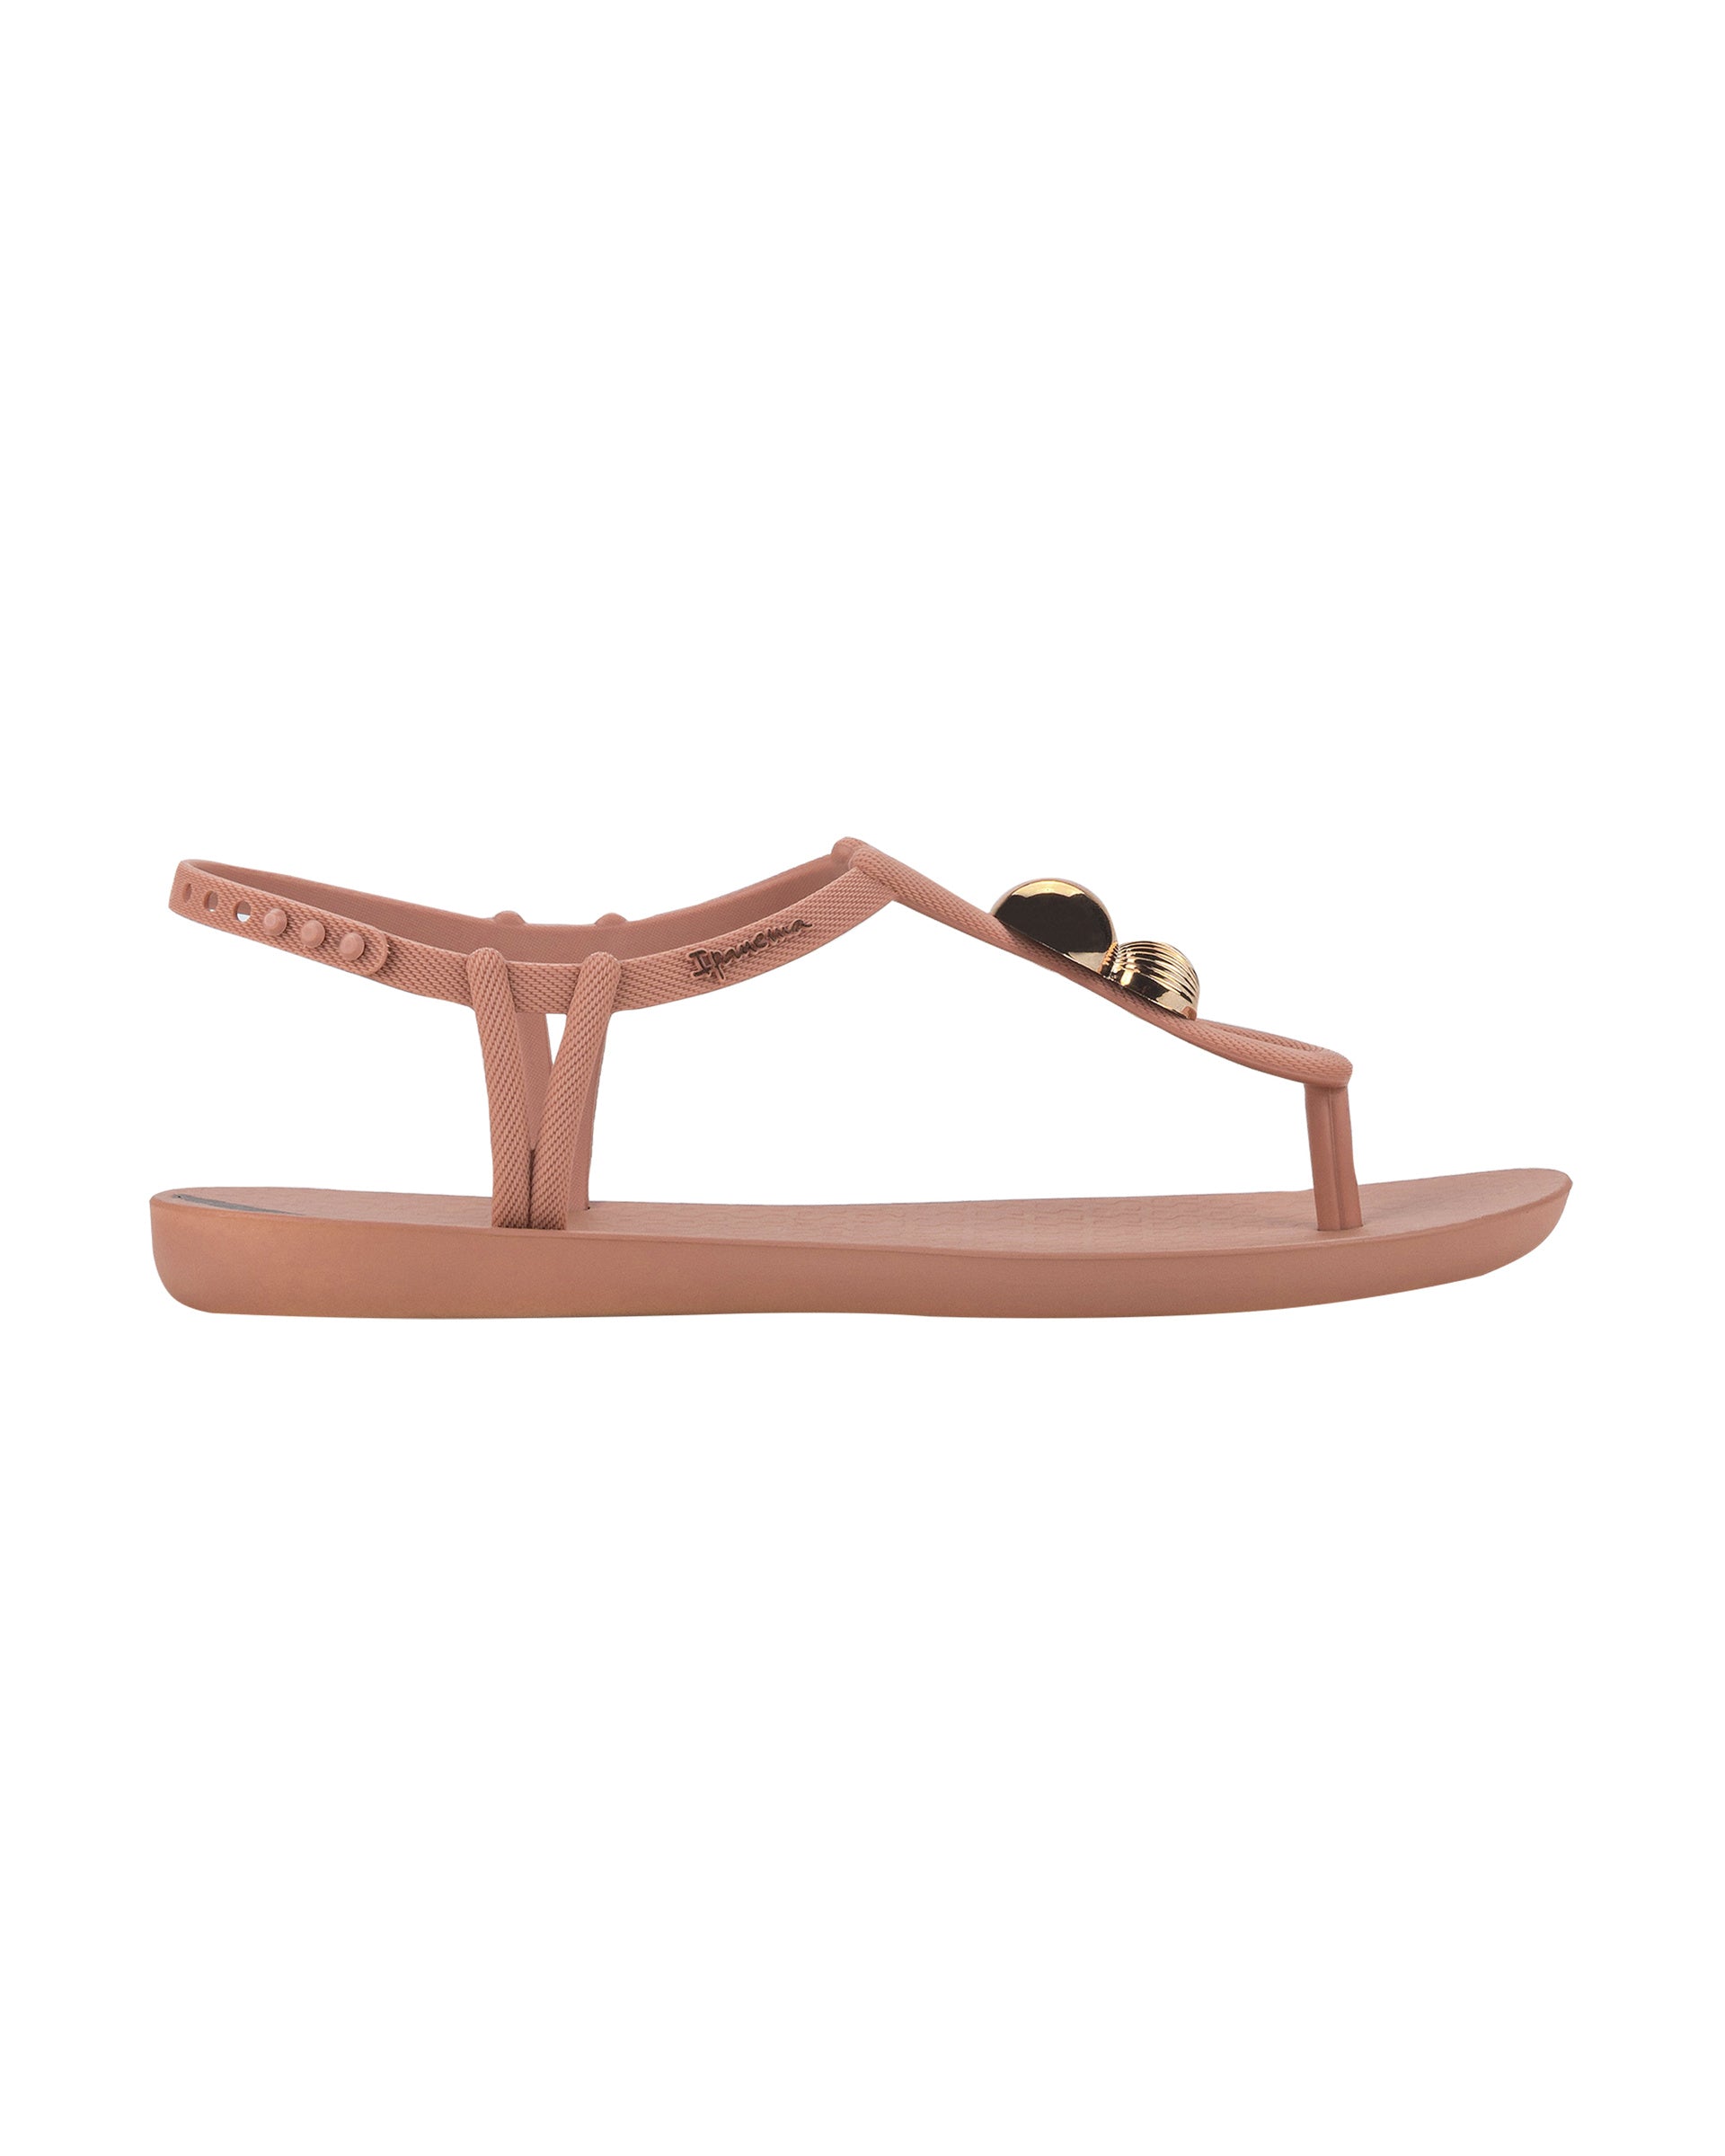 Outer side view of a light pink Ipanema Class Spheres women's t-strap sandal with metallic bauble.